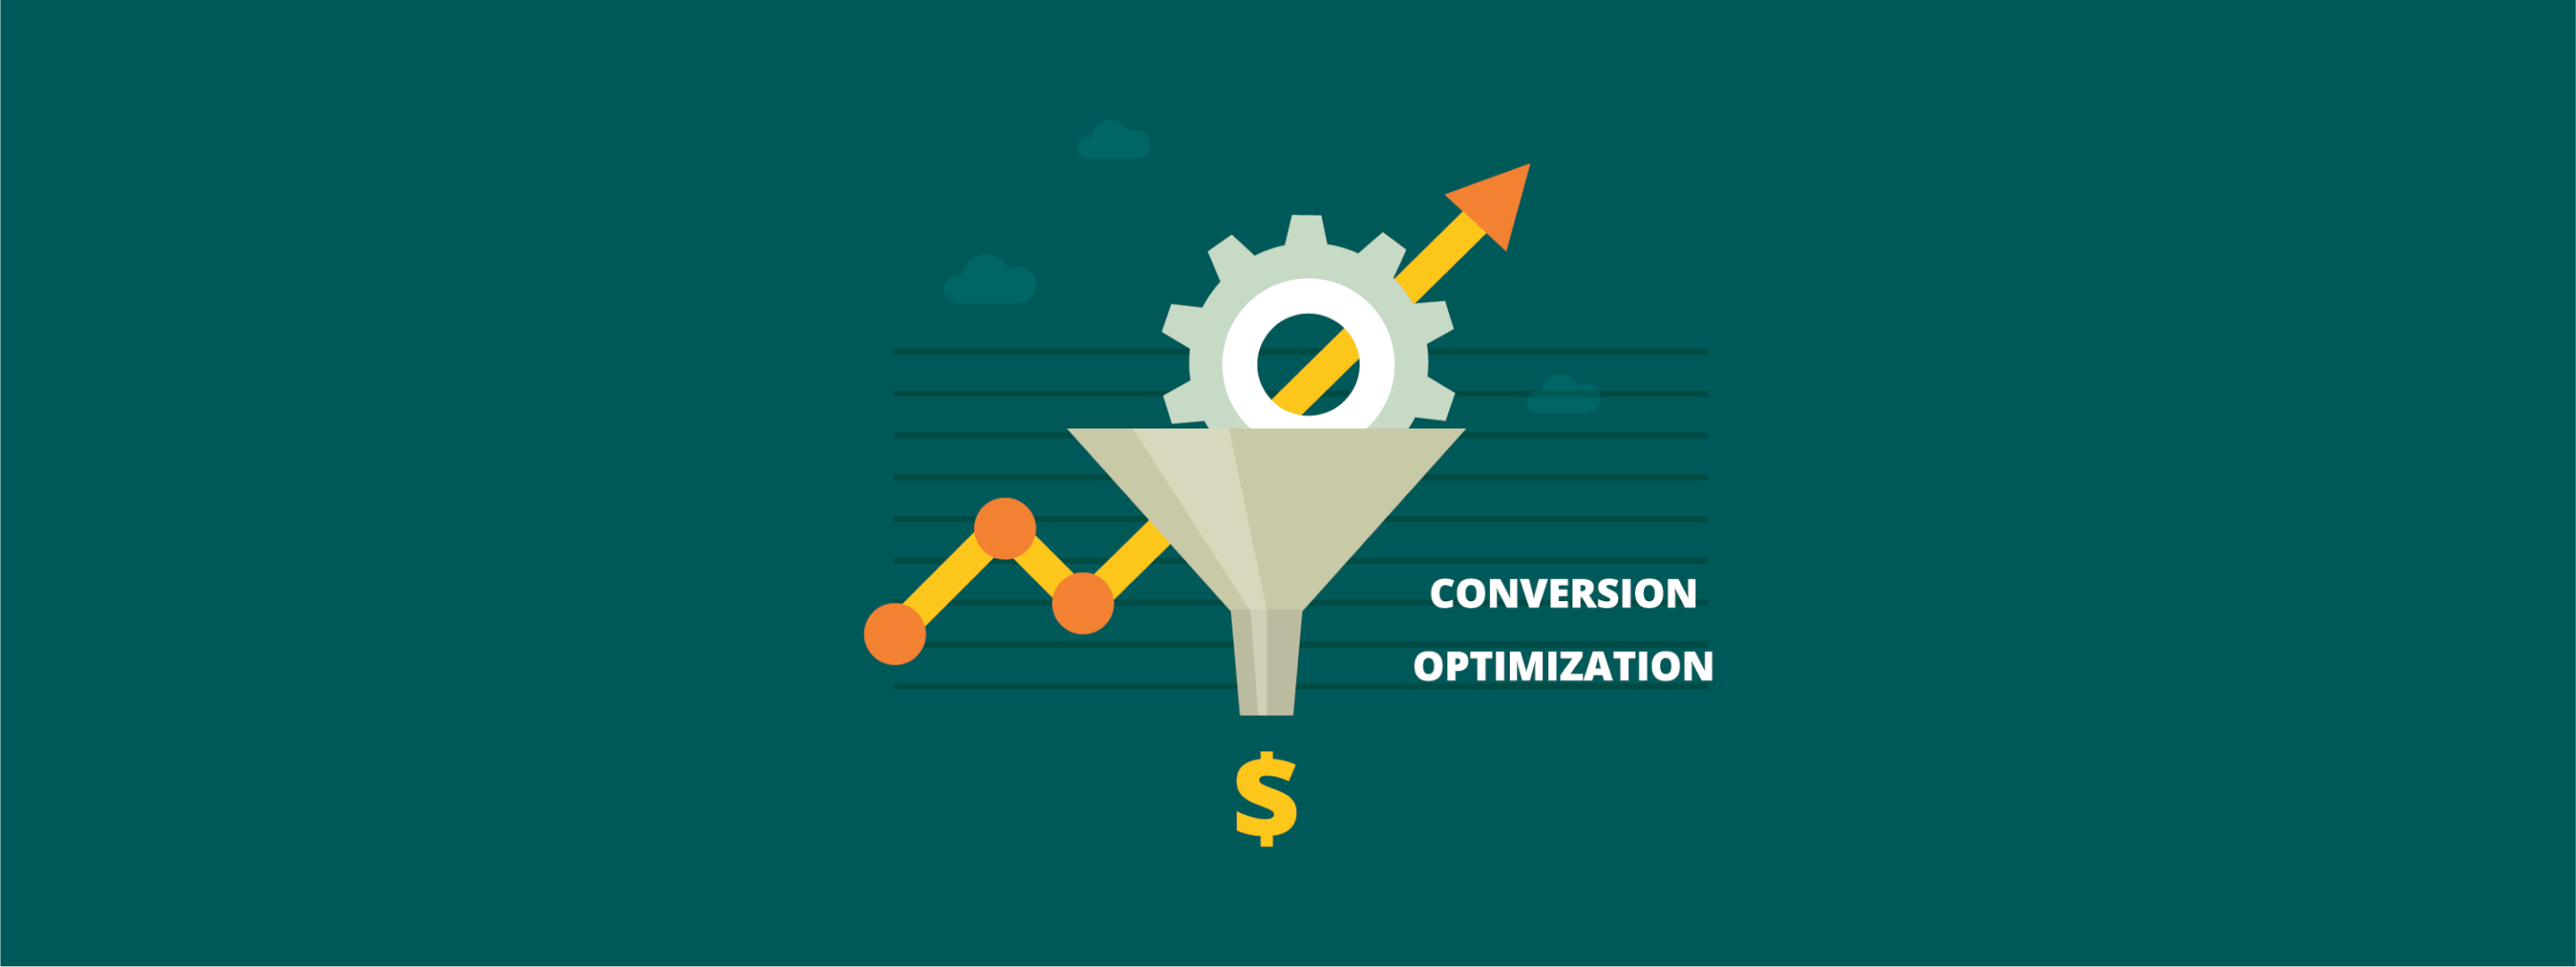 4 Best Practices For Conversion Rate Optimization (CRO)